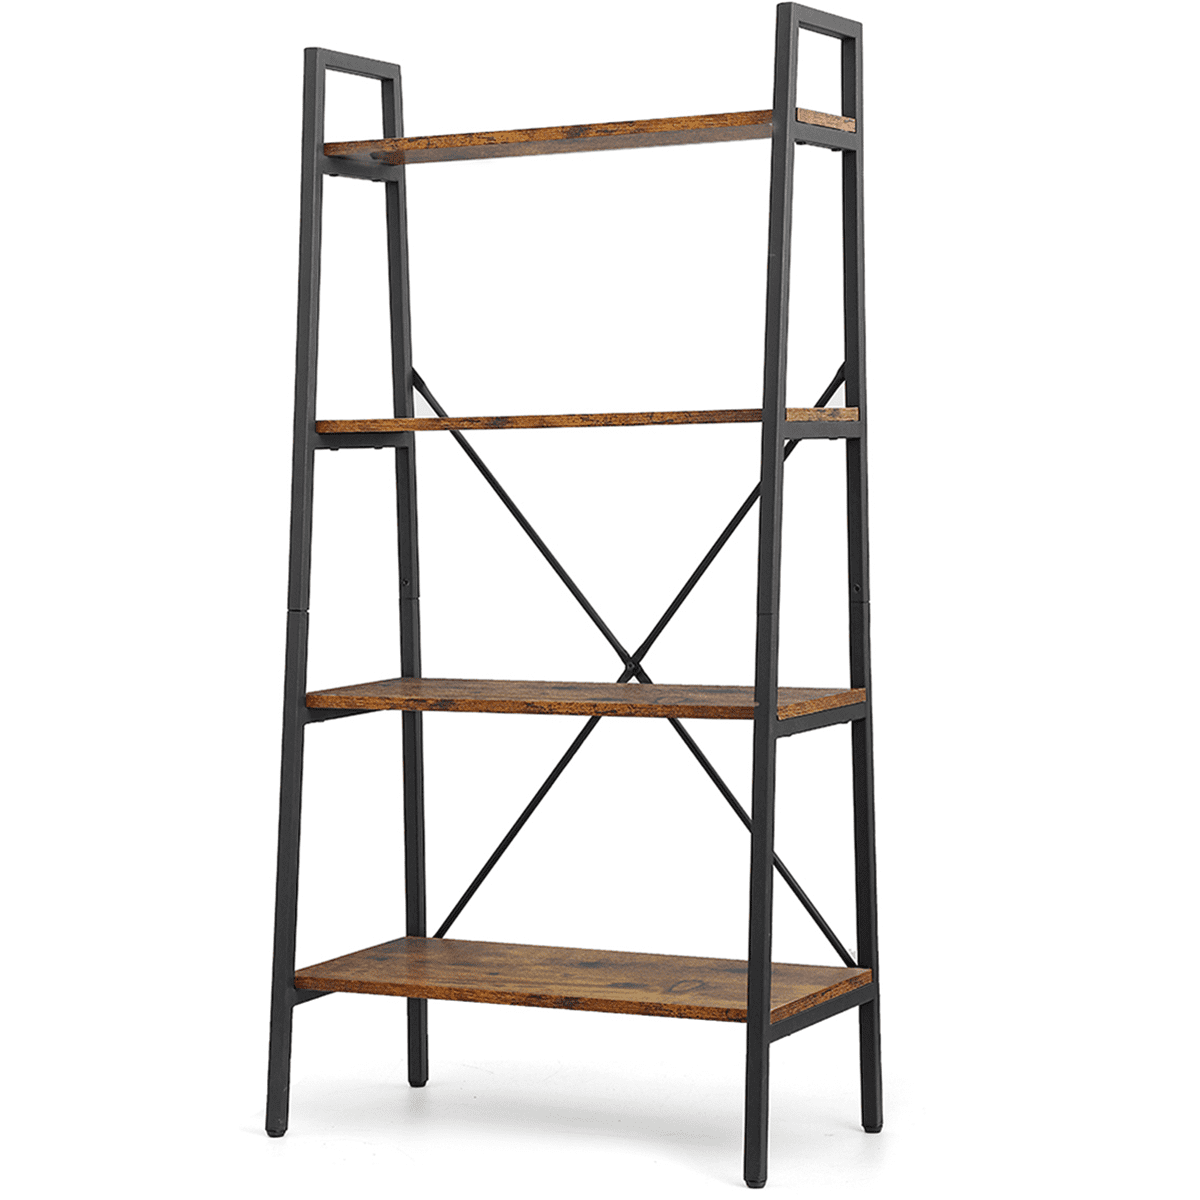 89cm Rustic Wooden Ladder Style 3 Tray Stand Book Shelf Ornamental Display 